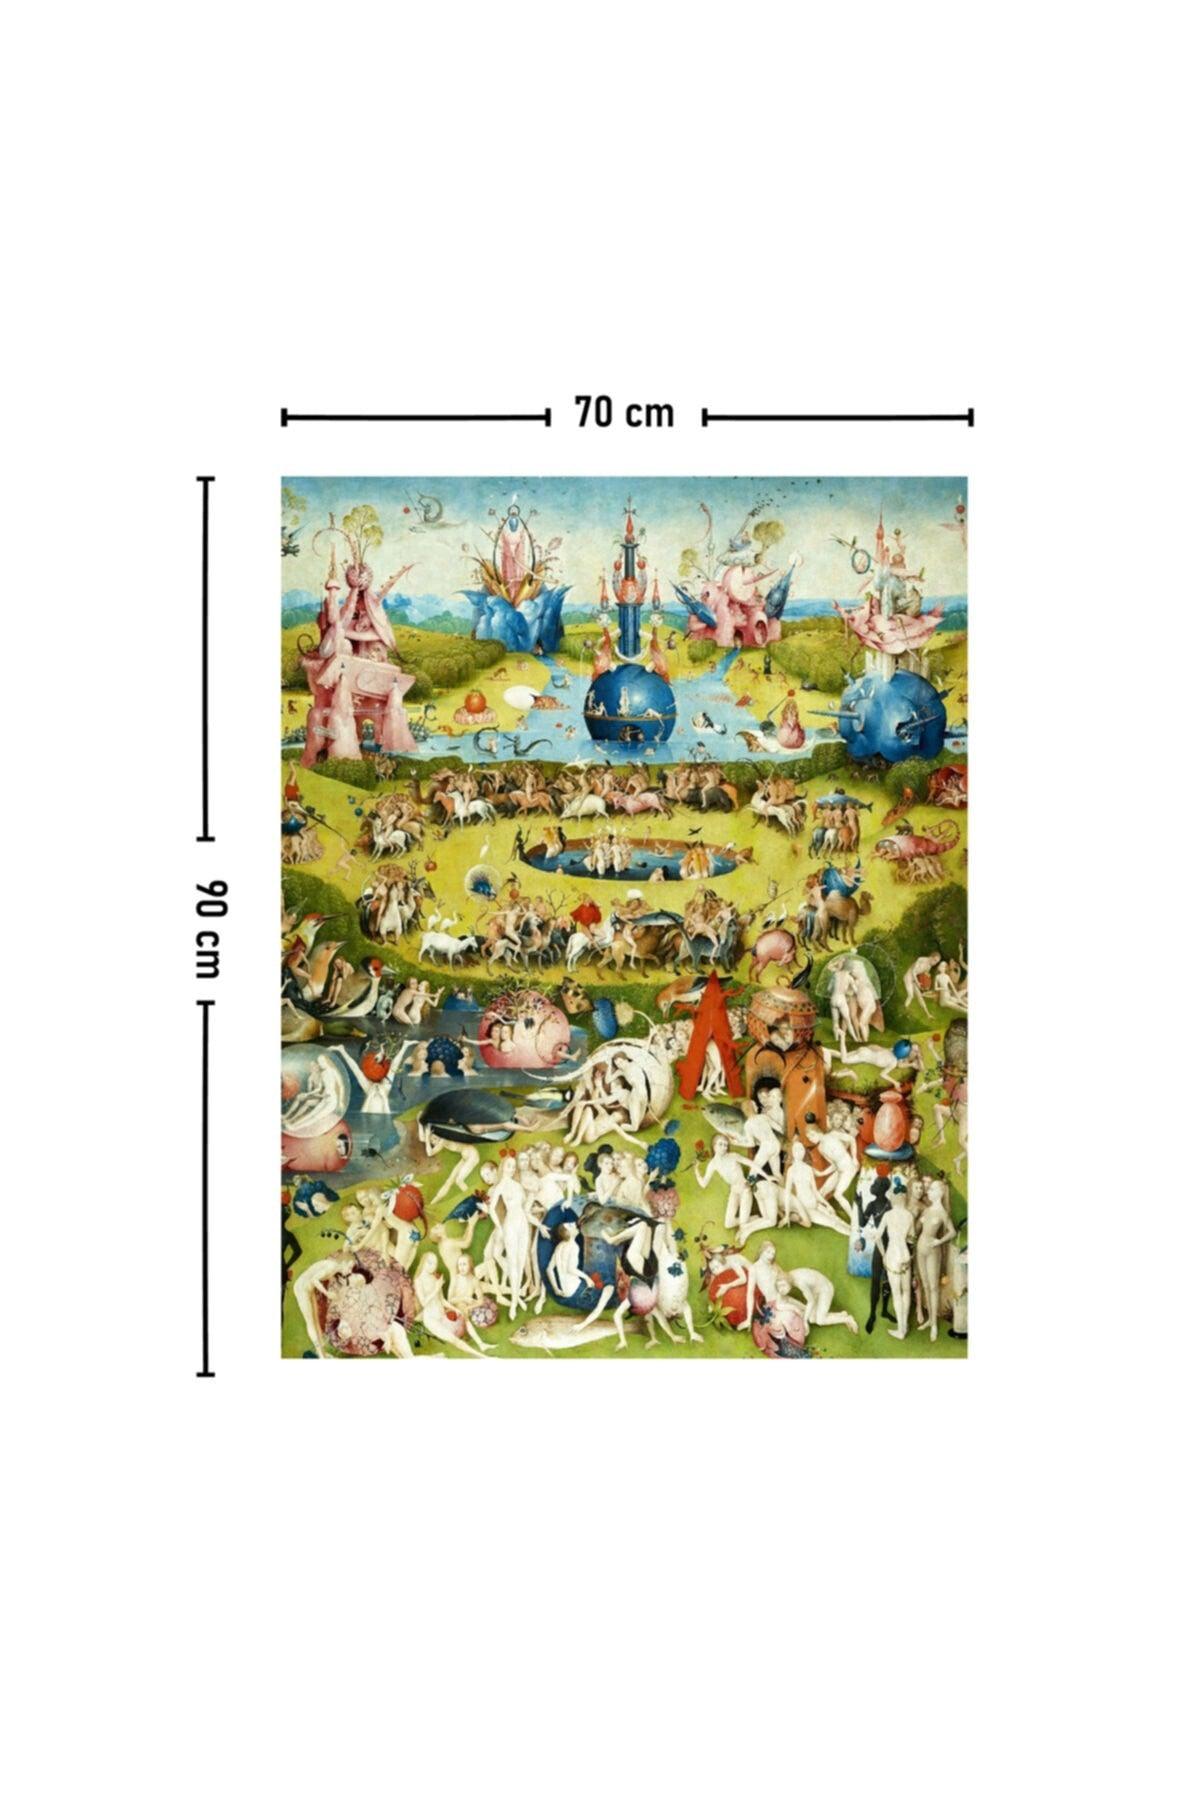 Hieronymus Bosch Garden of Earthly Delights Wall Covering Rug 70x90 cm - Swordslife